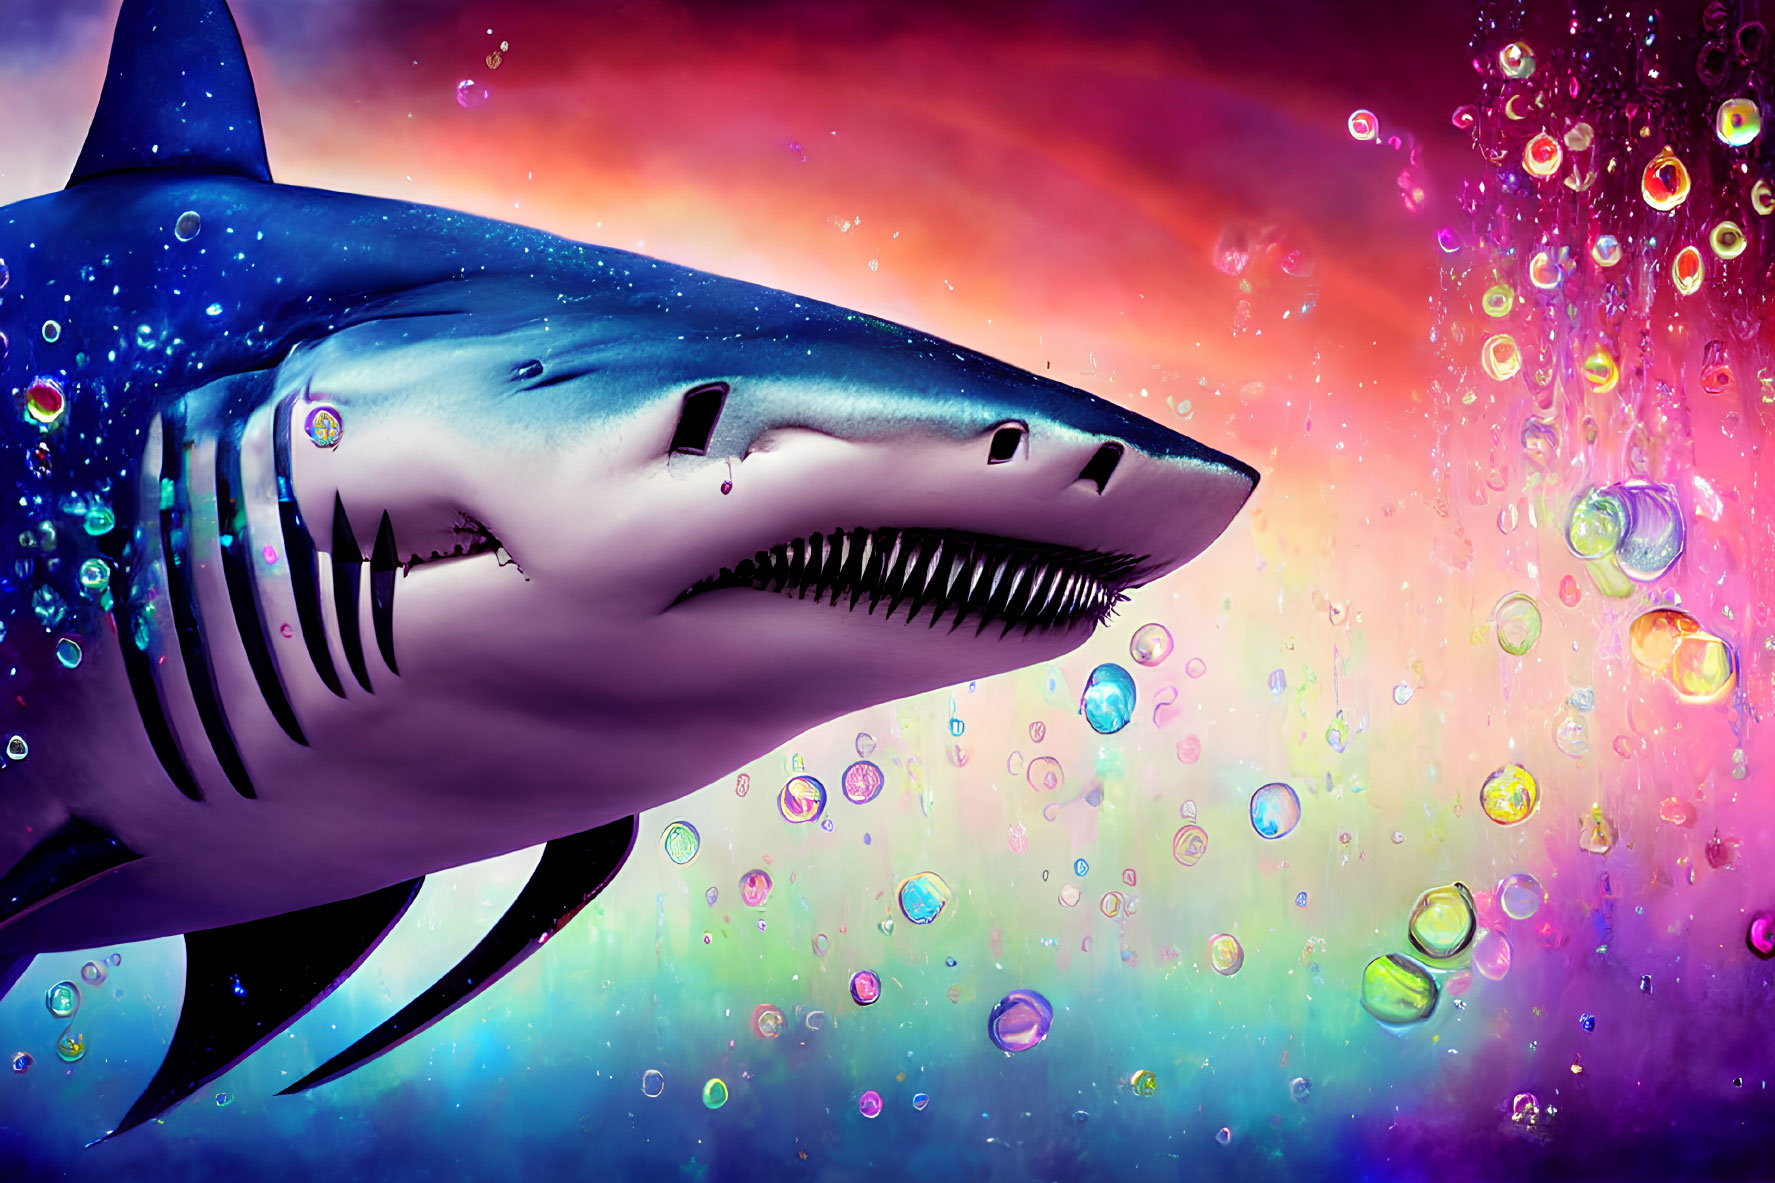 Colorful Shark Illustration with Bubbles in Purple Underwater Scene